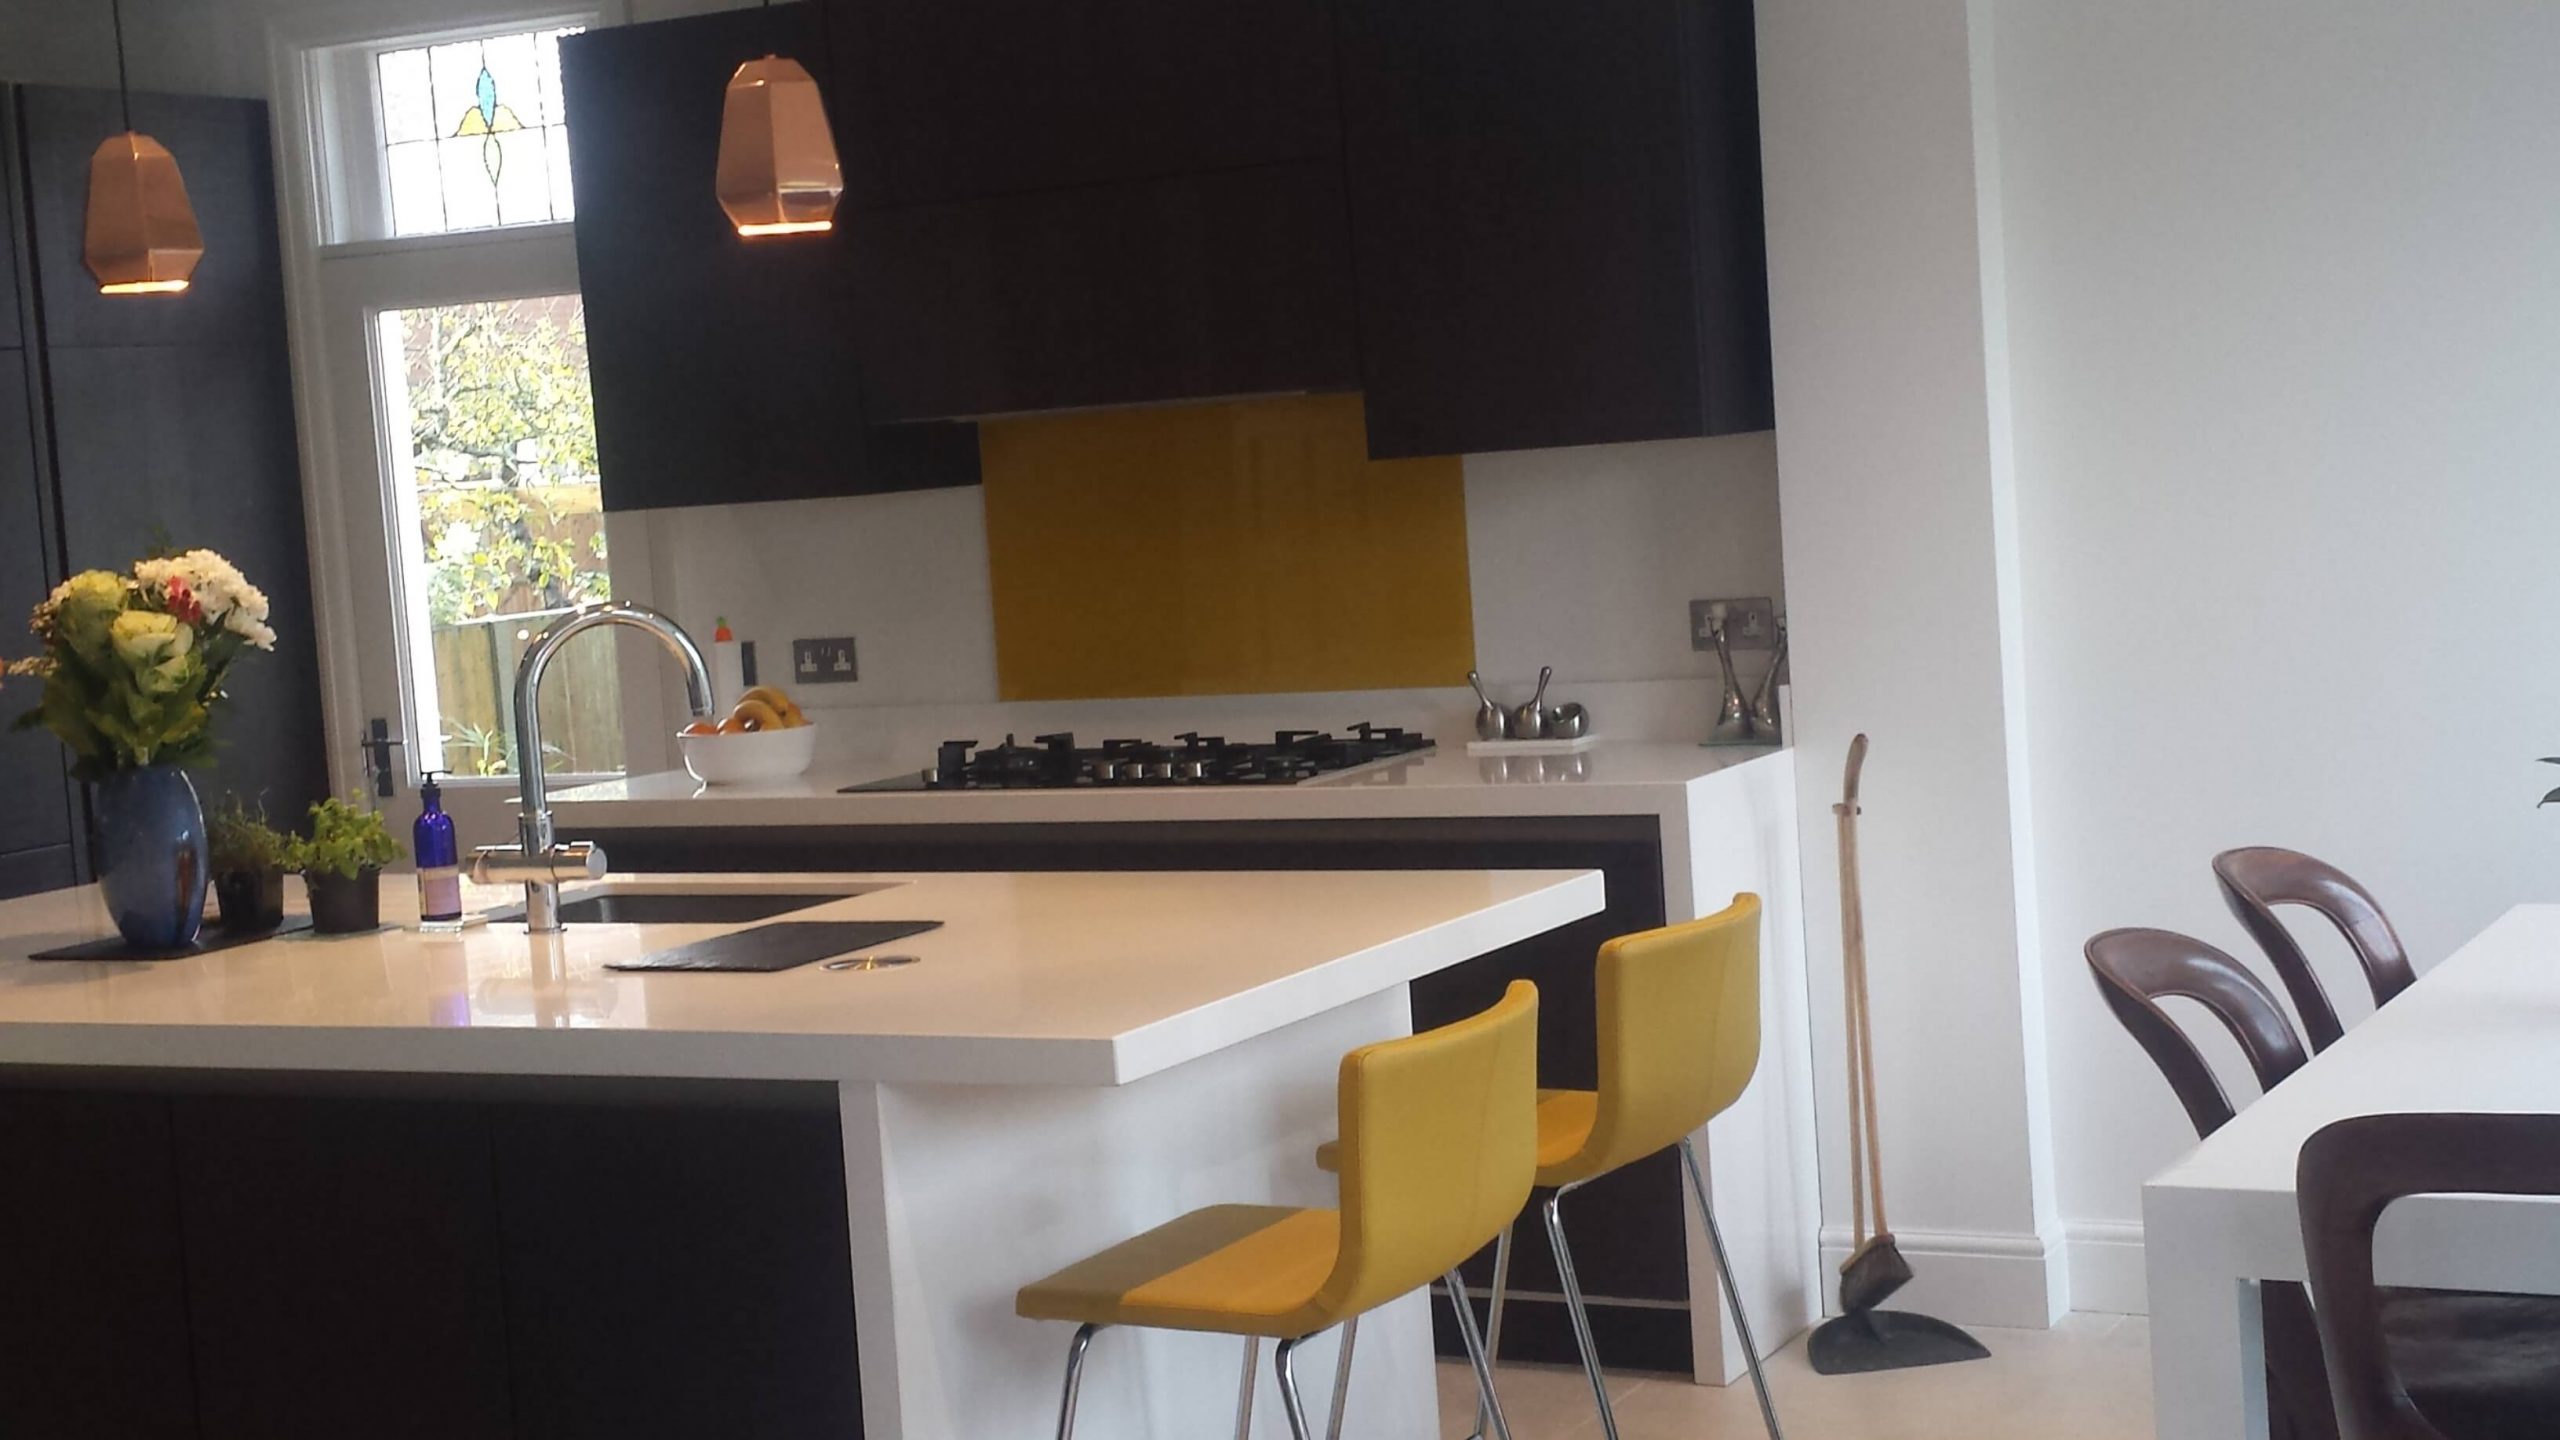 The benefits of visiting a kitchen showroom